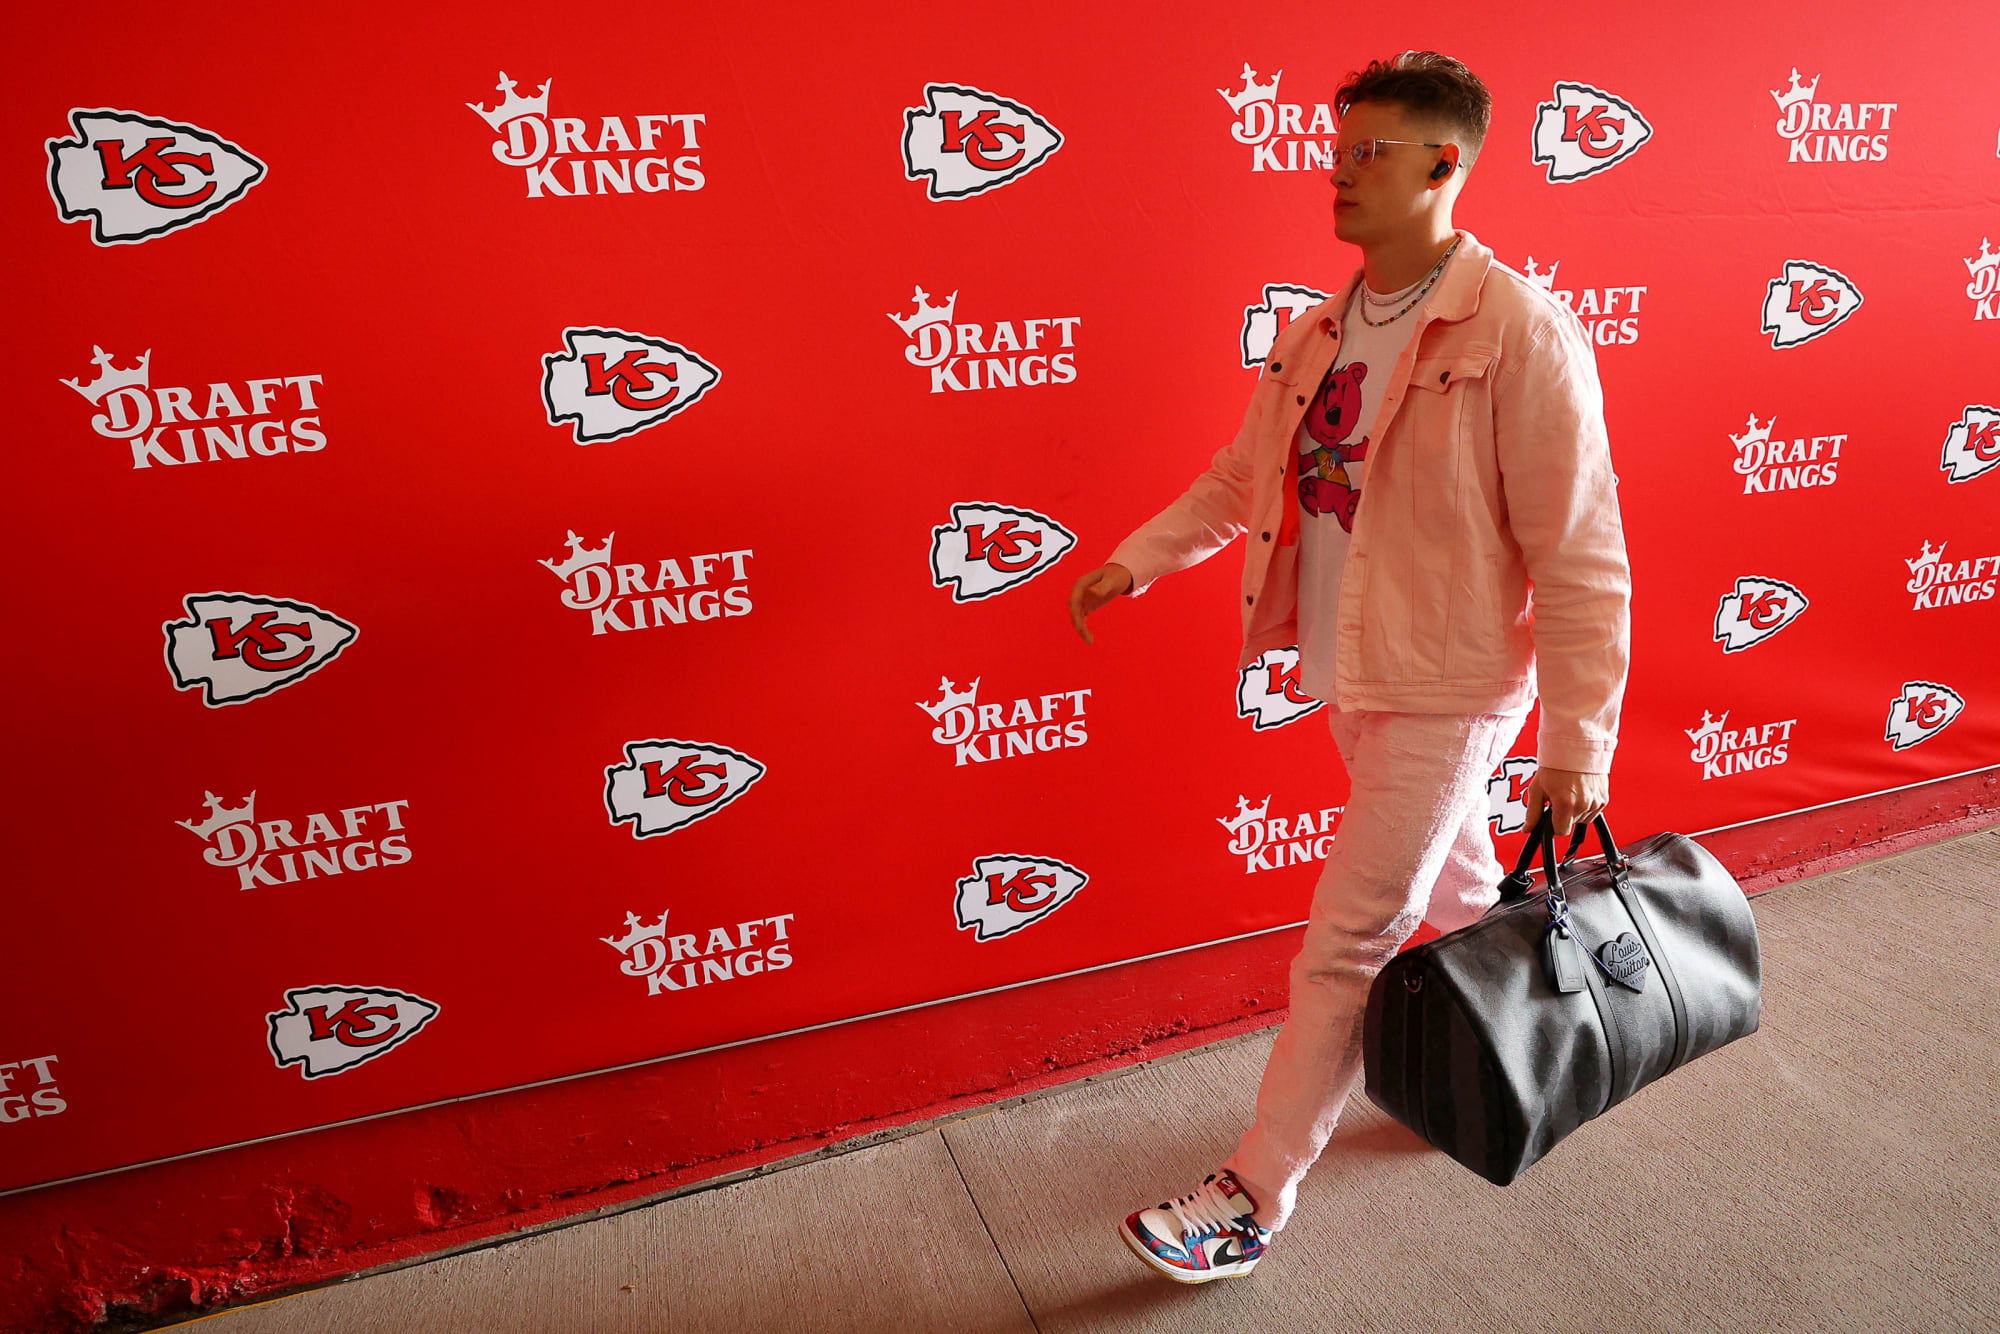 Joe Burrow’s limited wardrobe in KC shows desperate attempt to send Chiefs a message